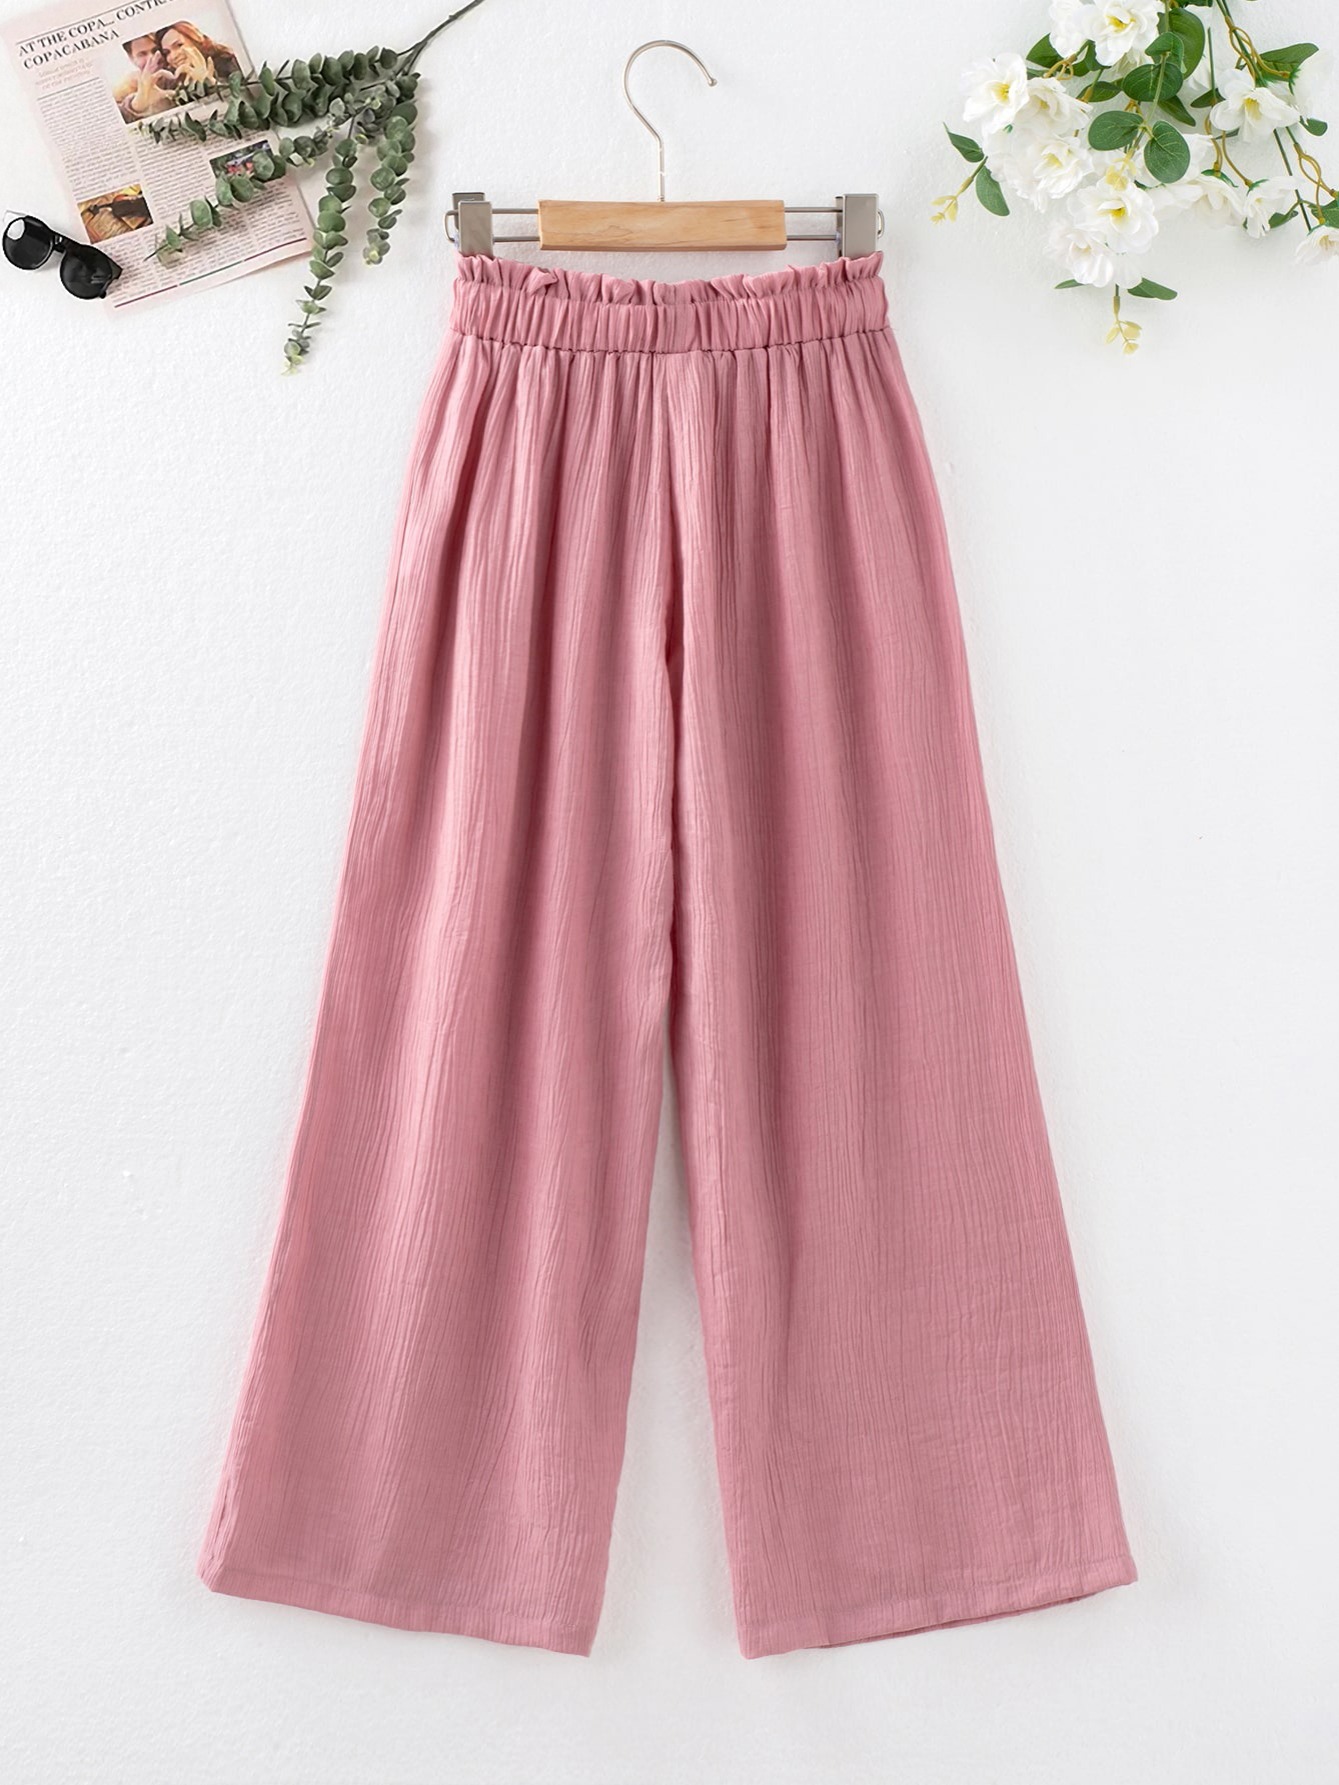 Fashion Pants for girls | Subdued